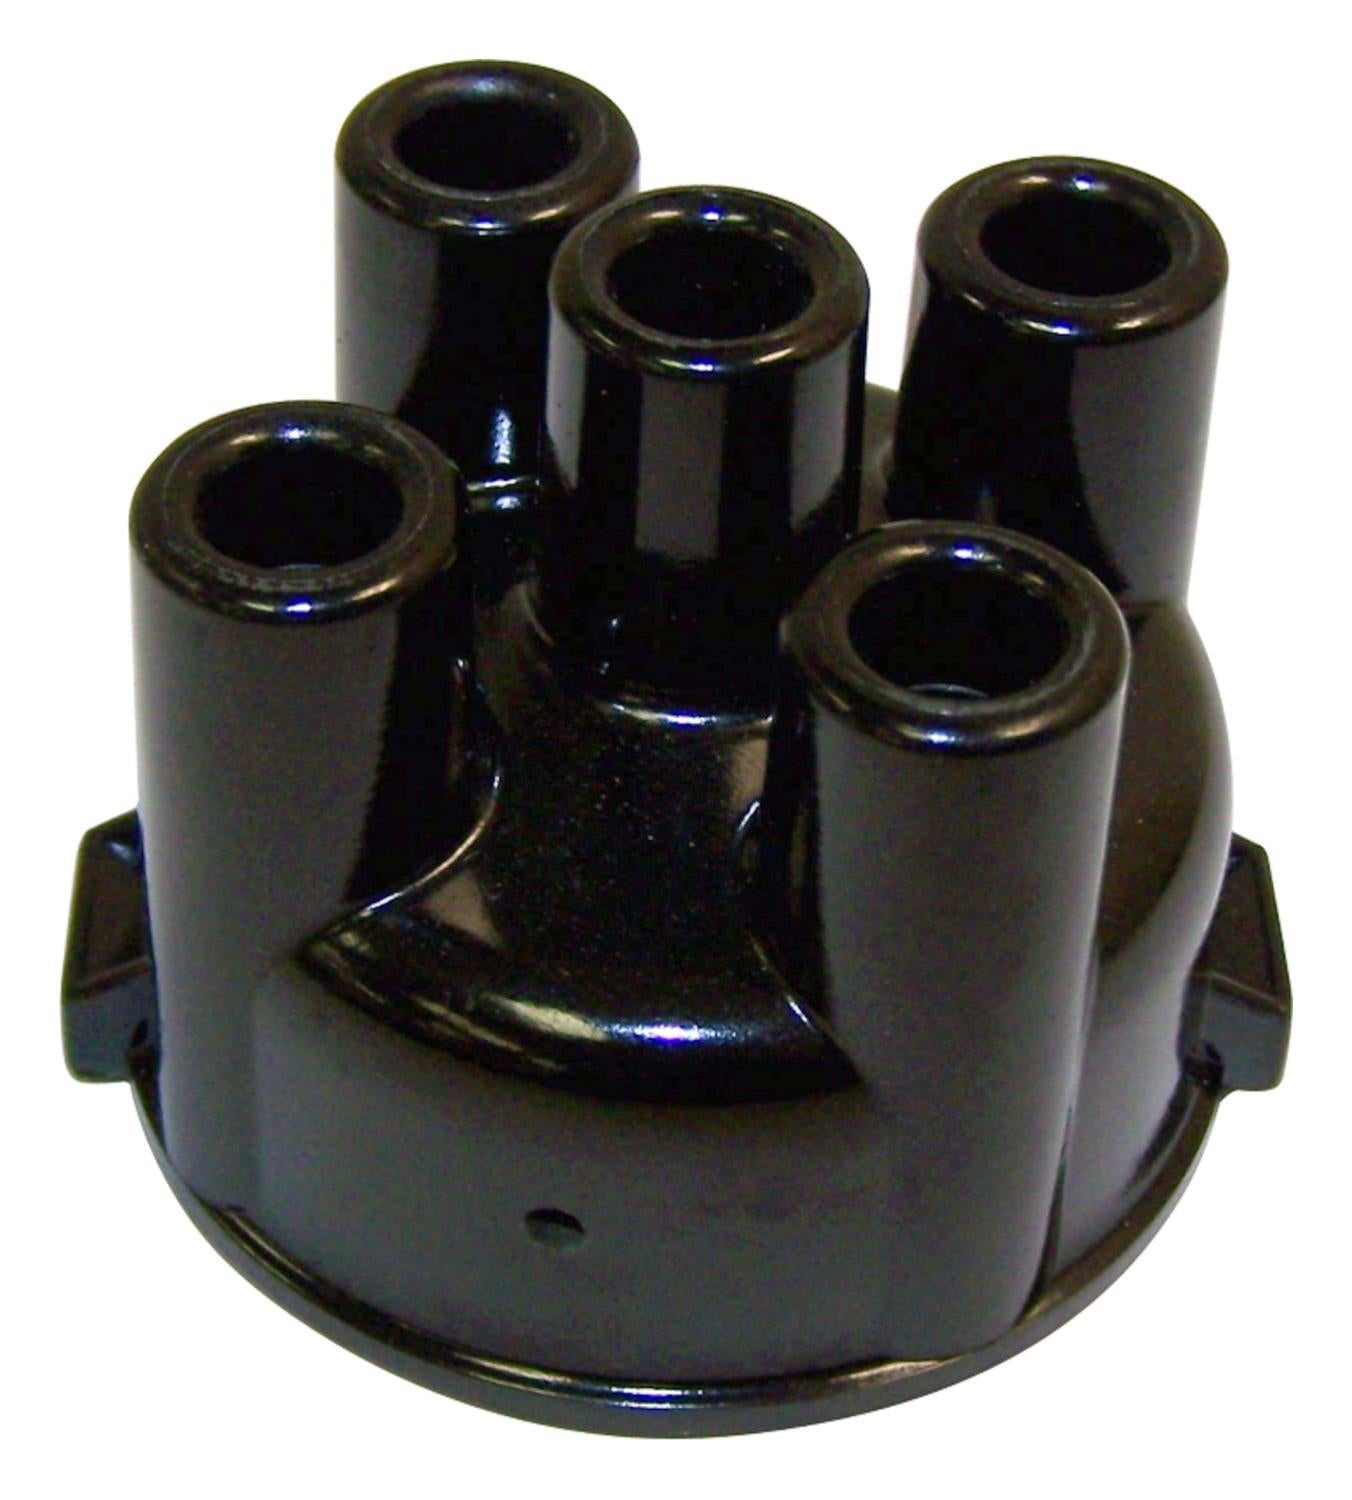 Distributor Cap, 4-134 Engine, 1946-1955, Willys Jeepster, Station Wagon, Pickup Truck - The JeepsterMan